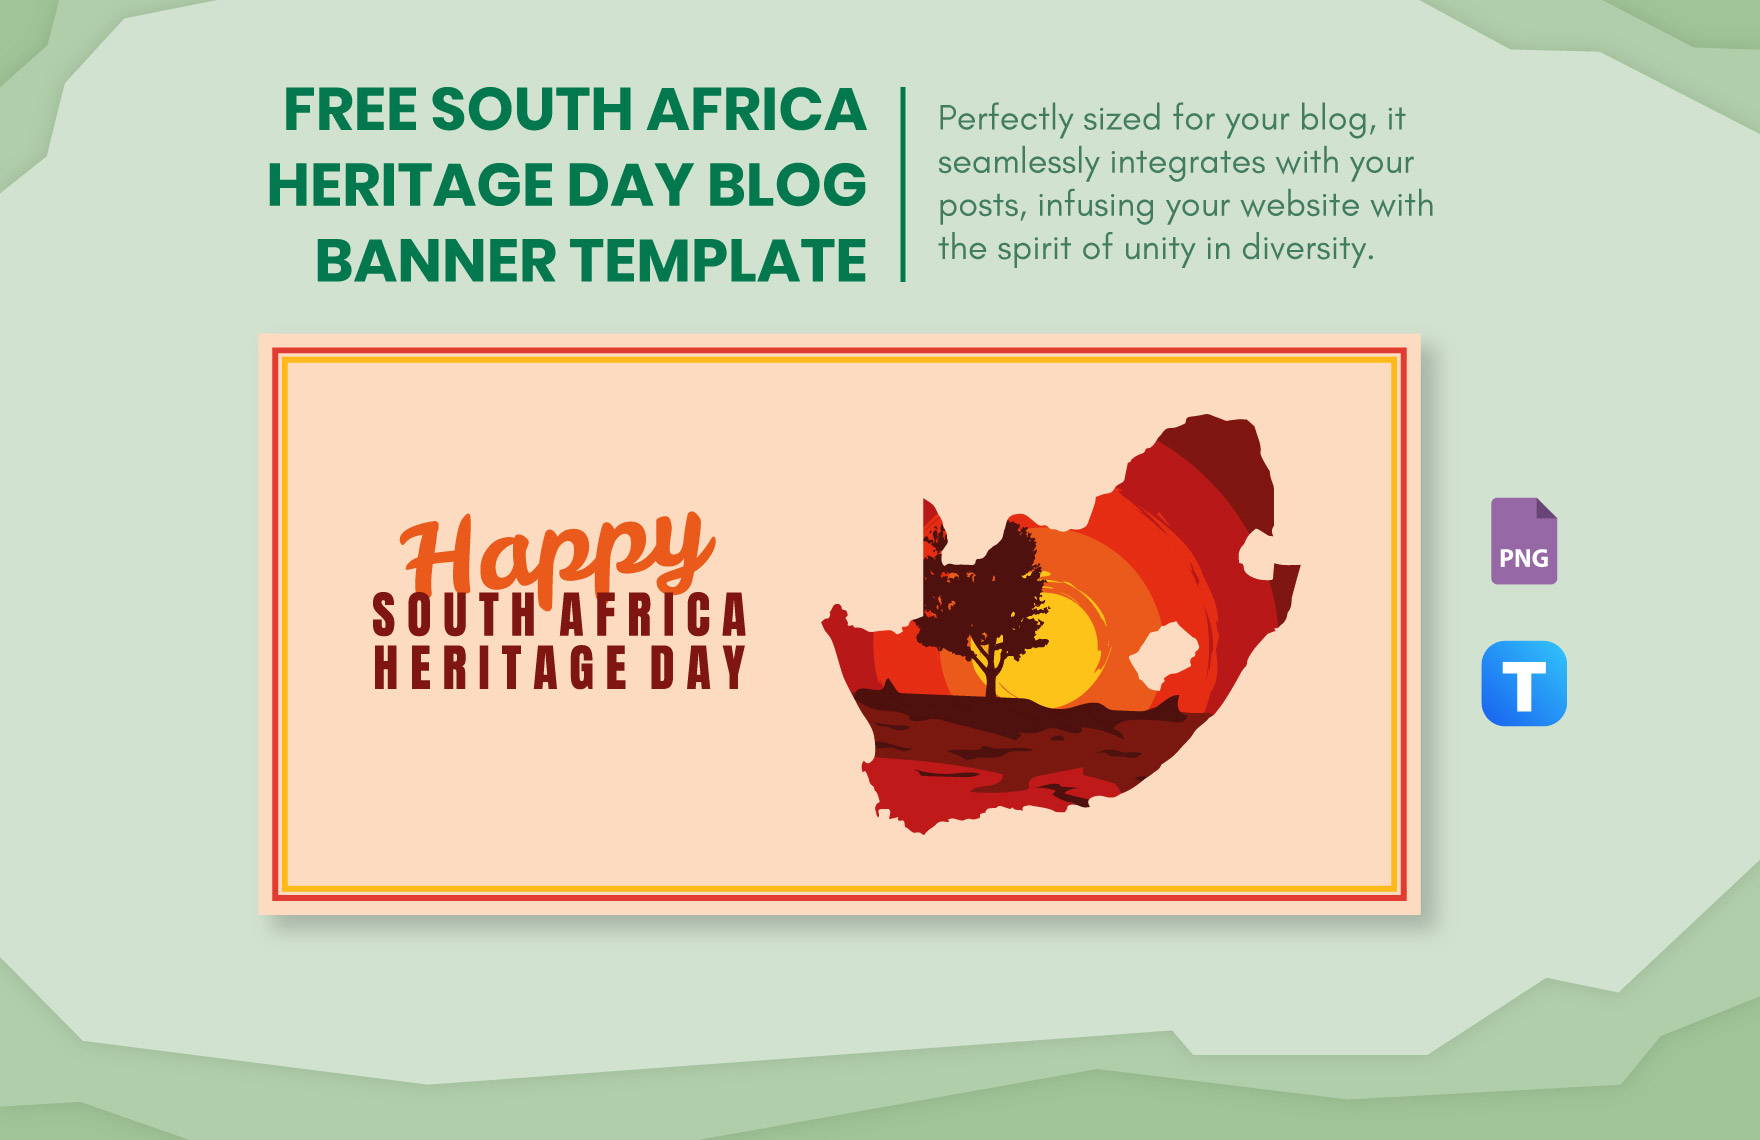 Free South Africa Heritage Day Blog Banner Template in PNG